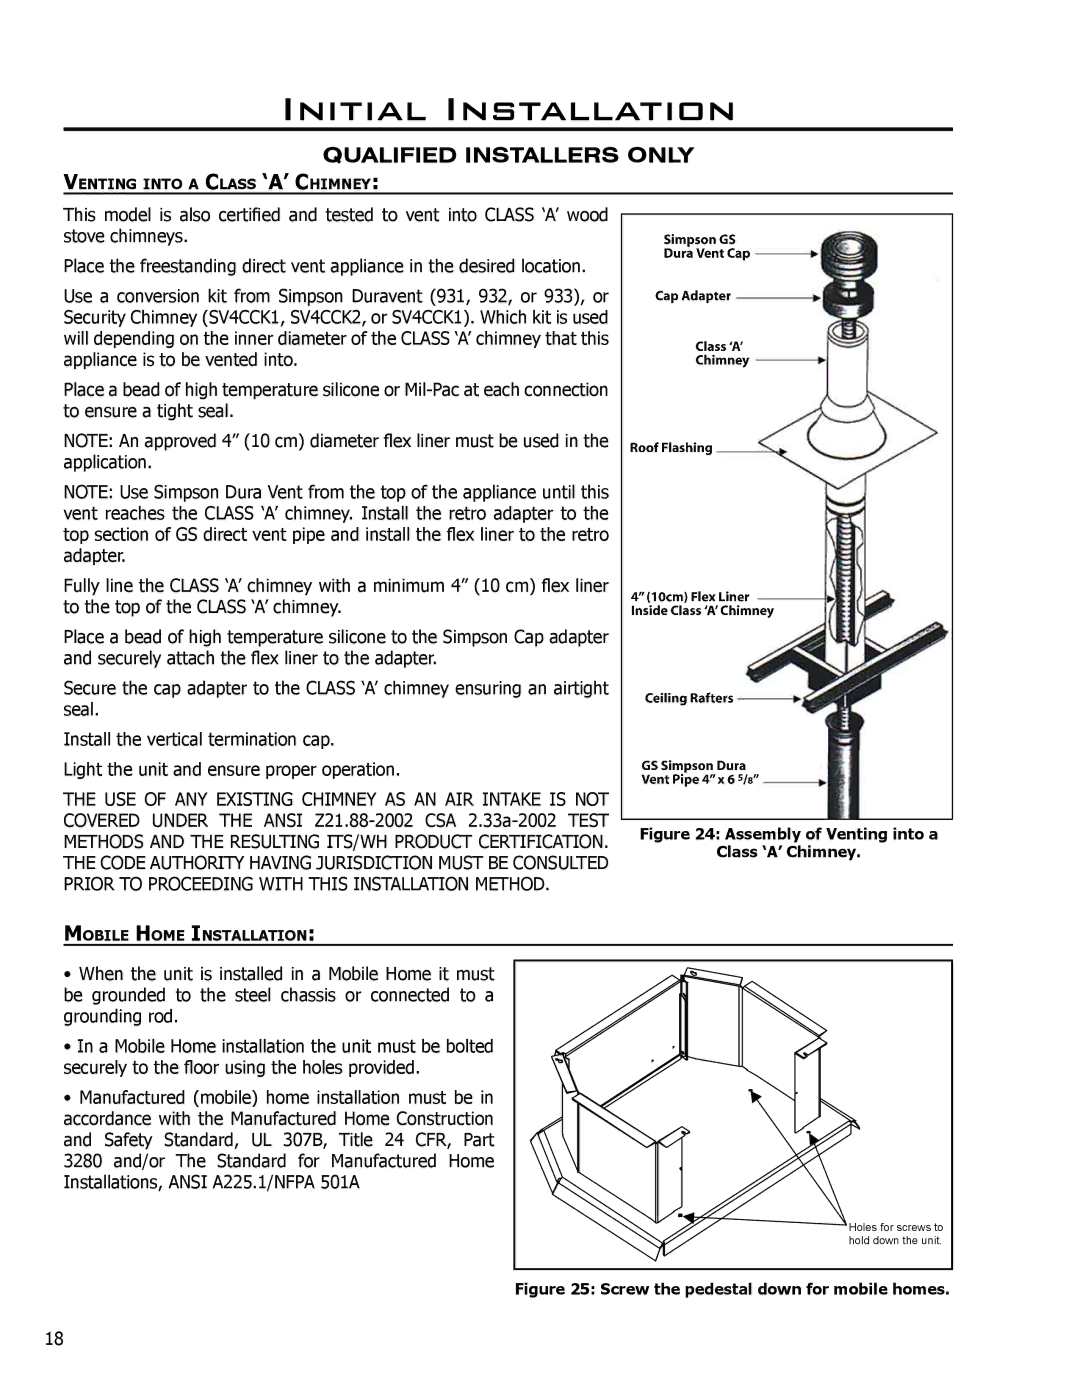 Enviro C-10450 owner manual Assembly of Venting into a Class ‘A’ Chimney 